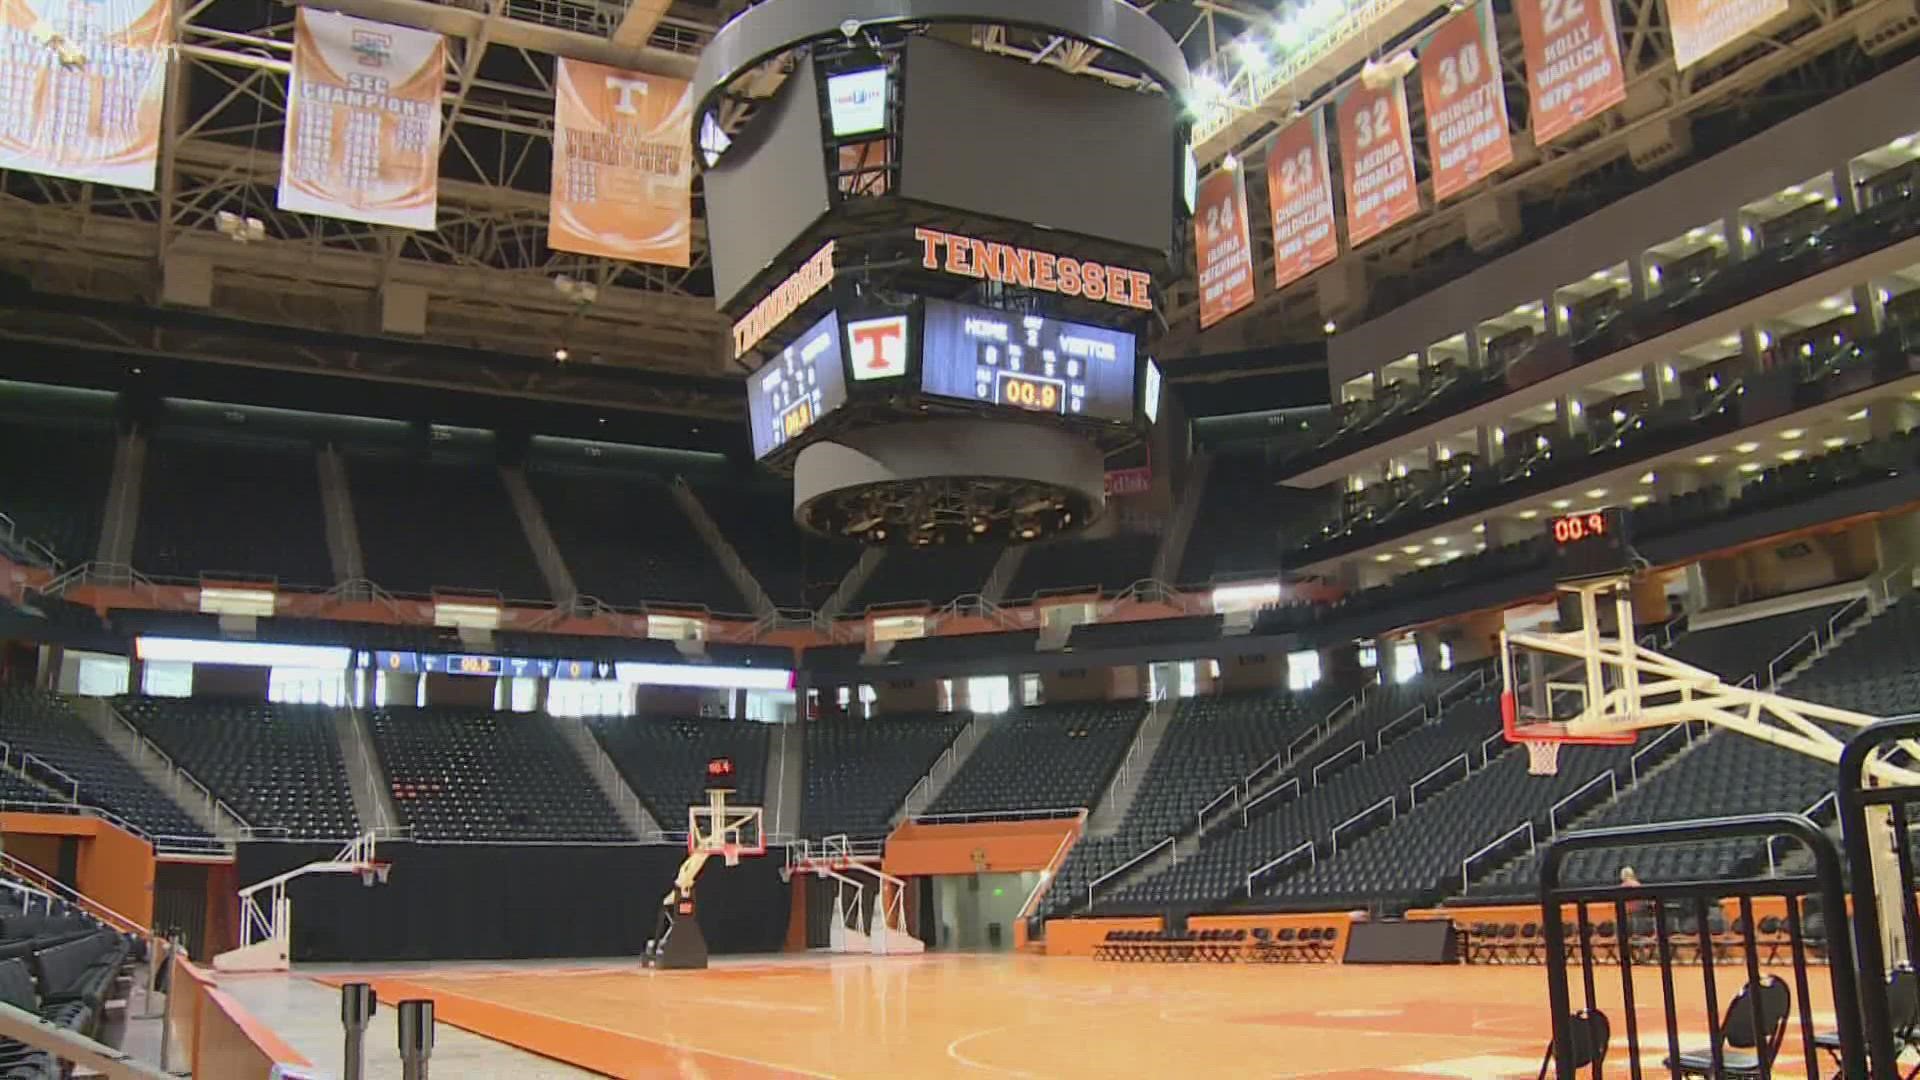 Tennessee is excited to hit the court today, as they host Southern Illinois. The Lady Vols said they are pumped to open the new season in front of fans again.